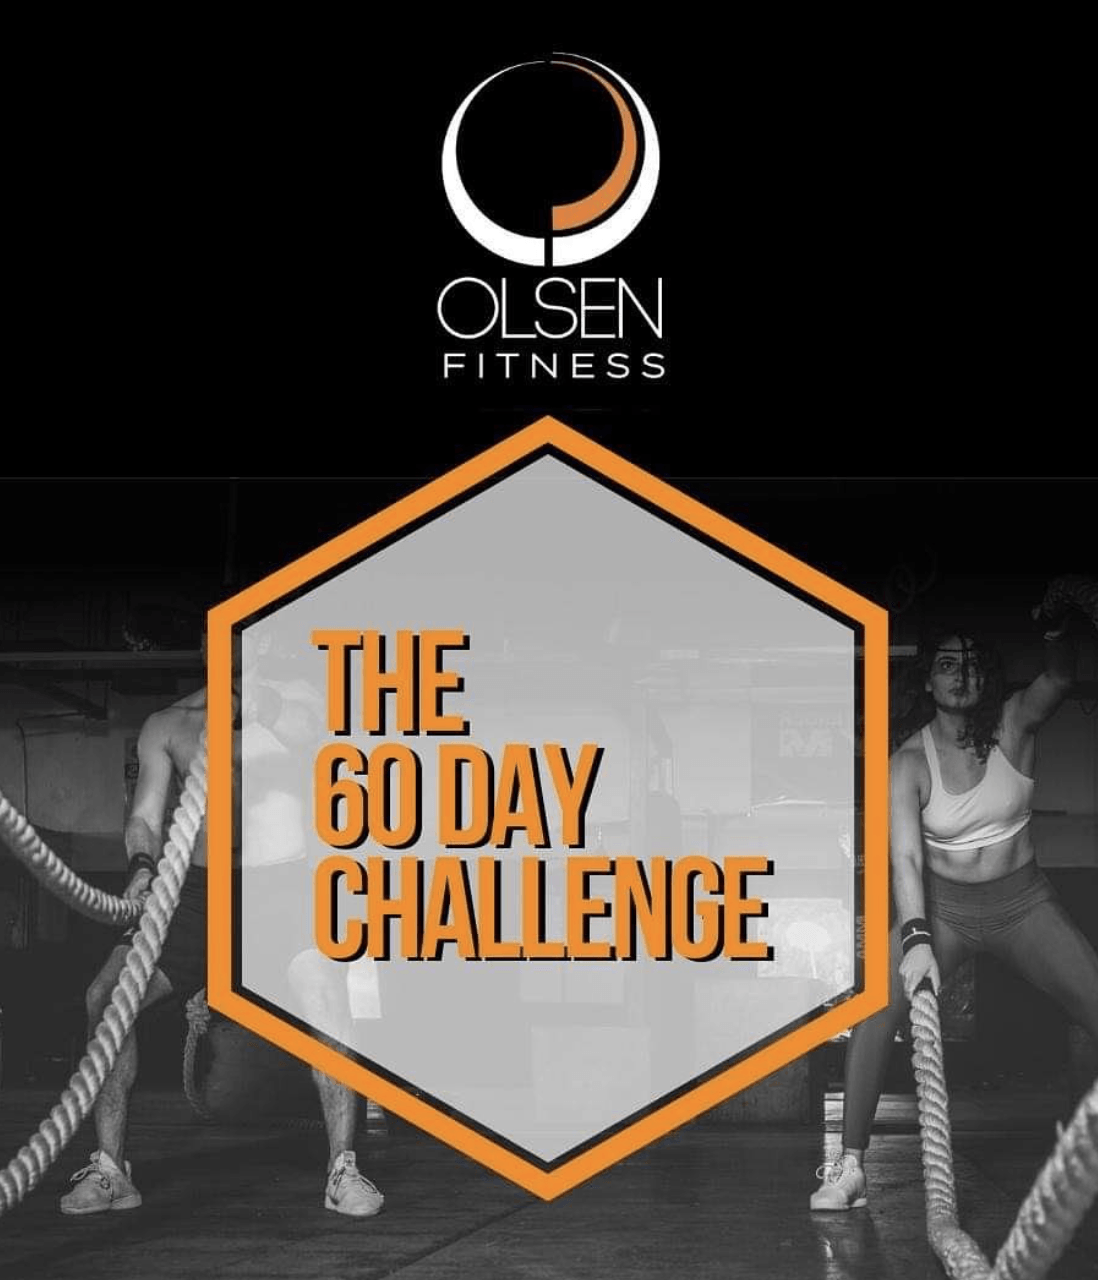 THE 60 DAY CHALLENGE